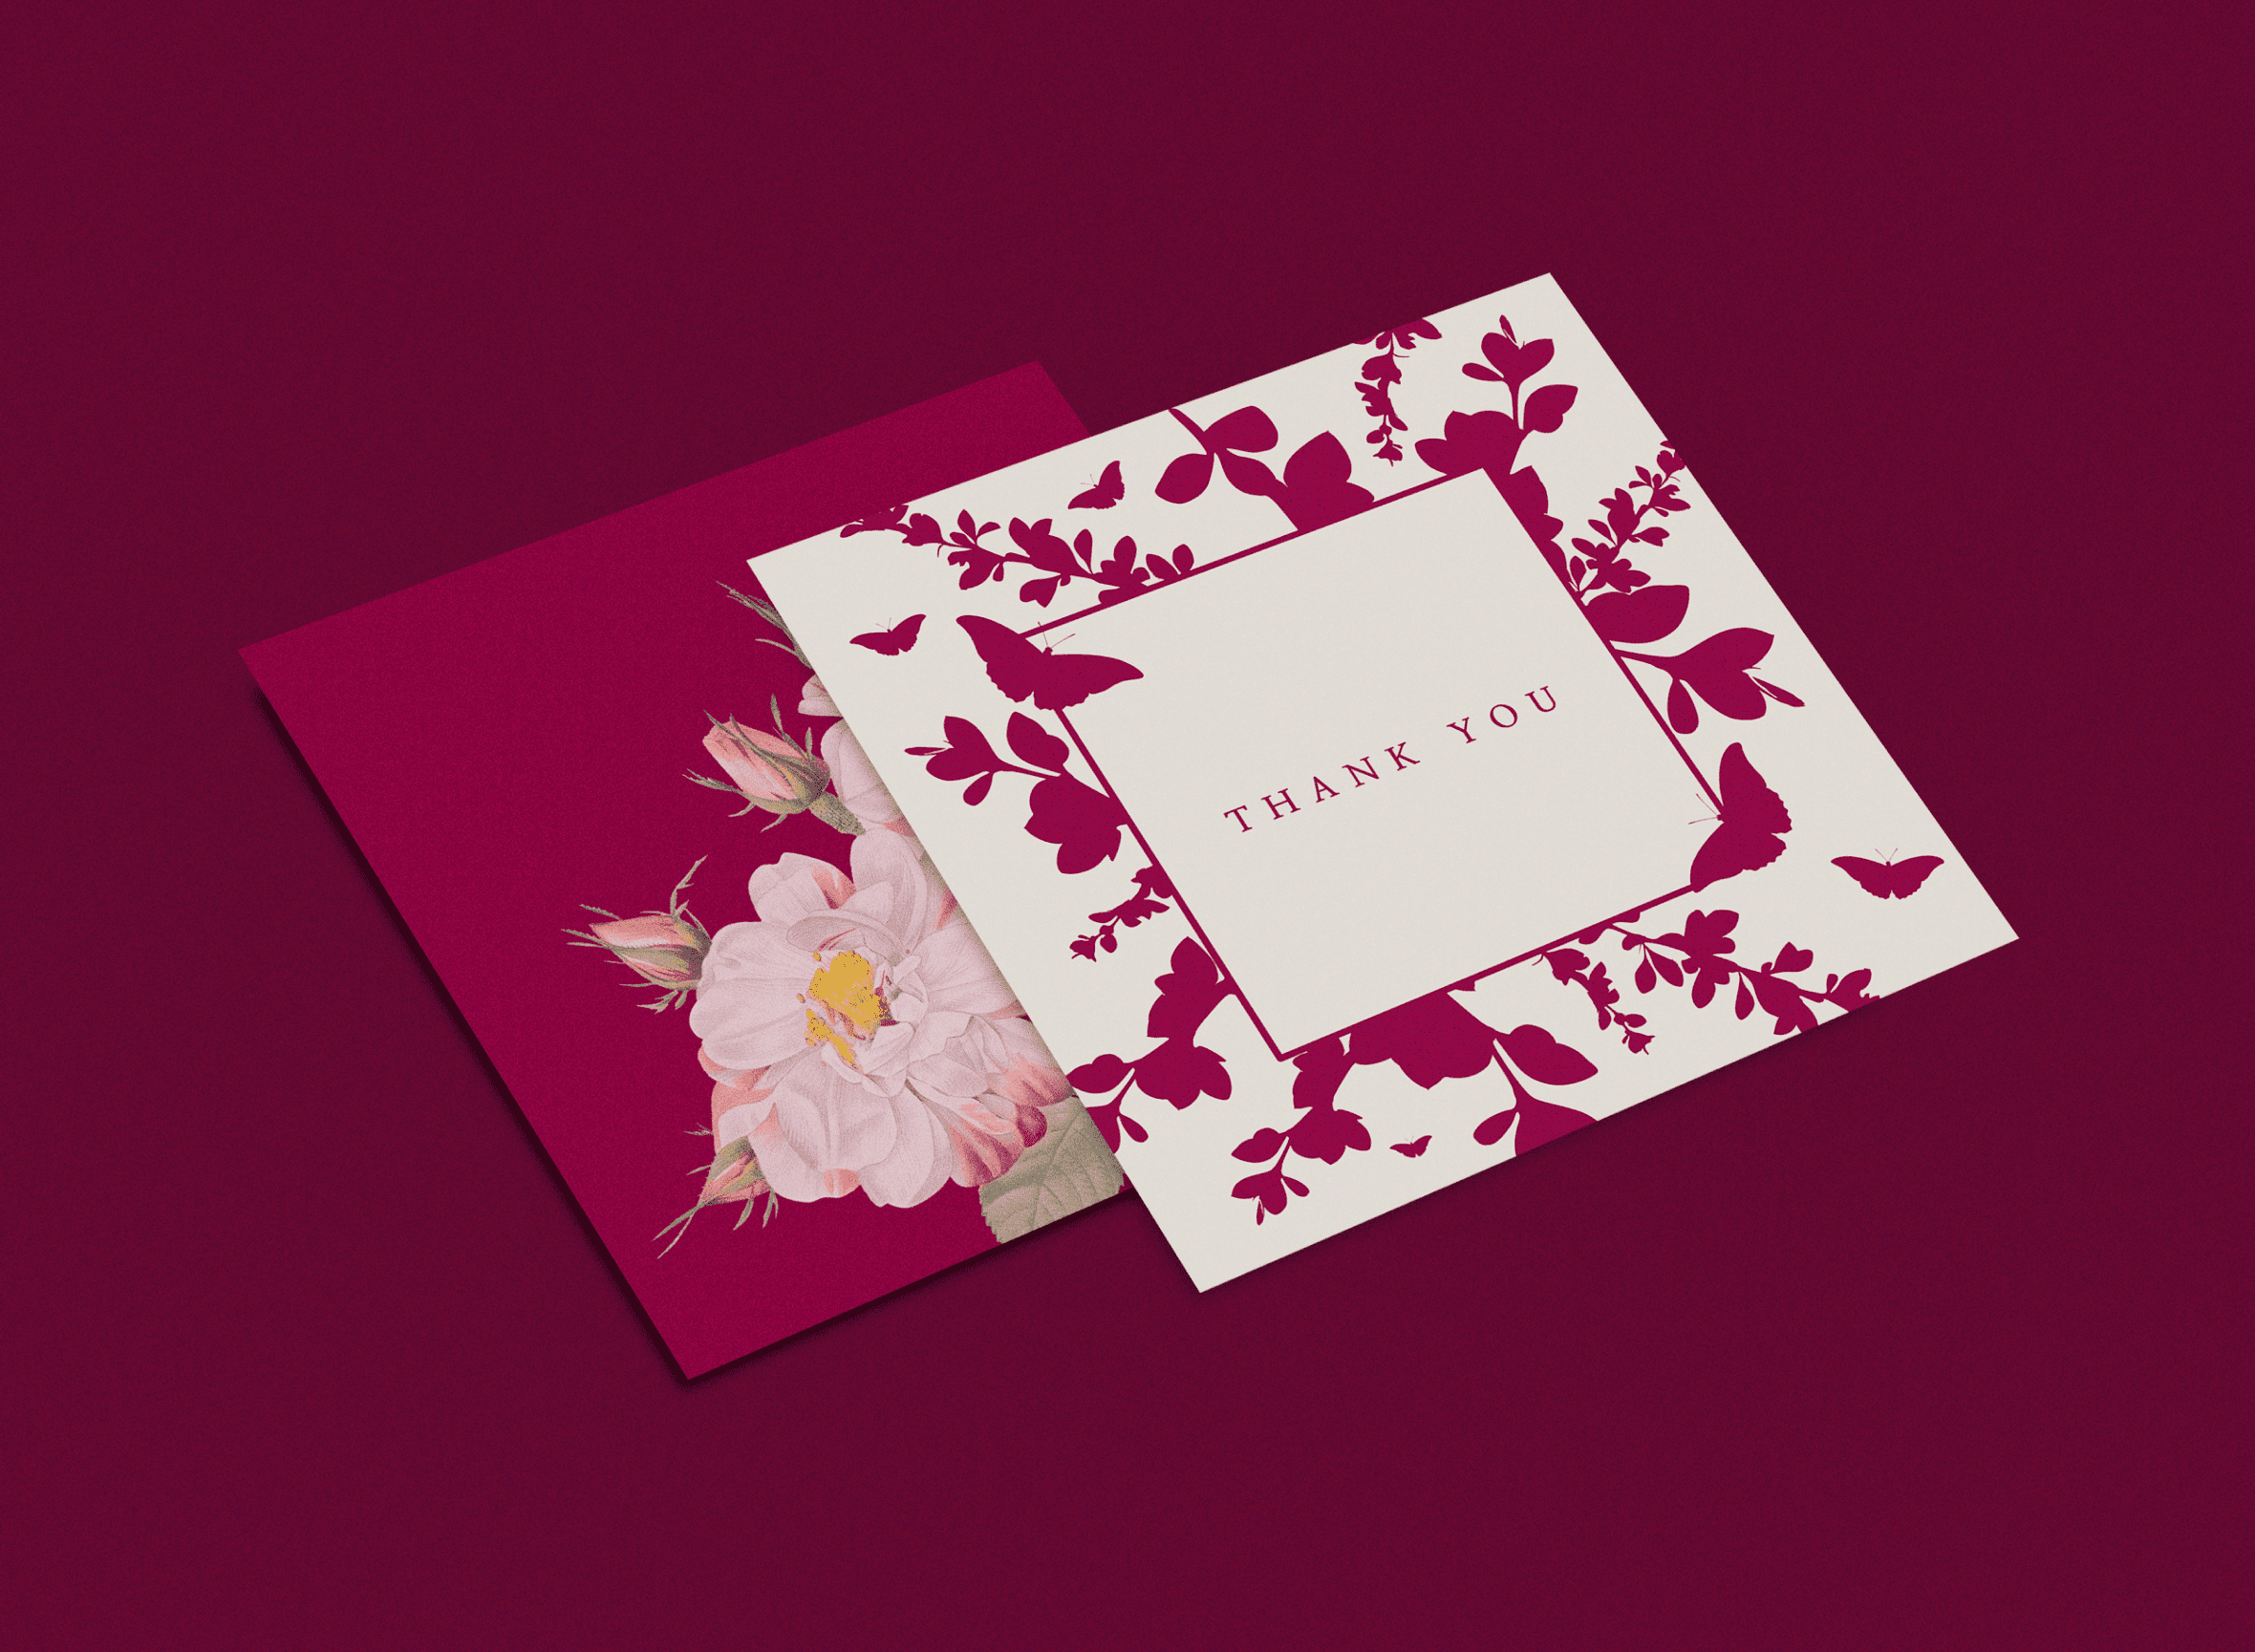 Two cards with flowers on a dark pink background